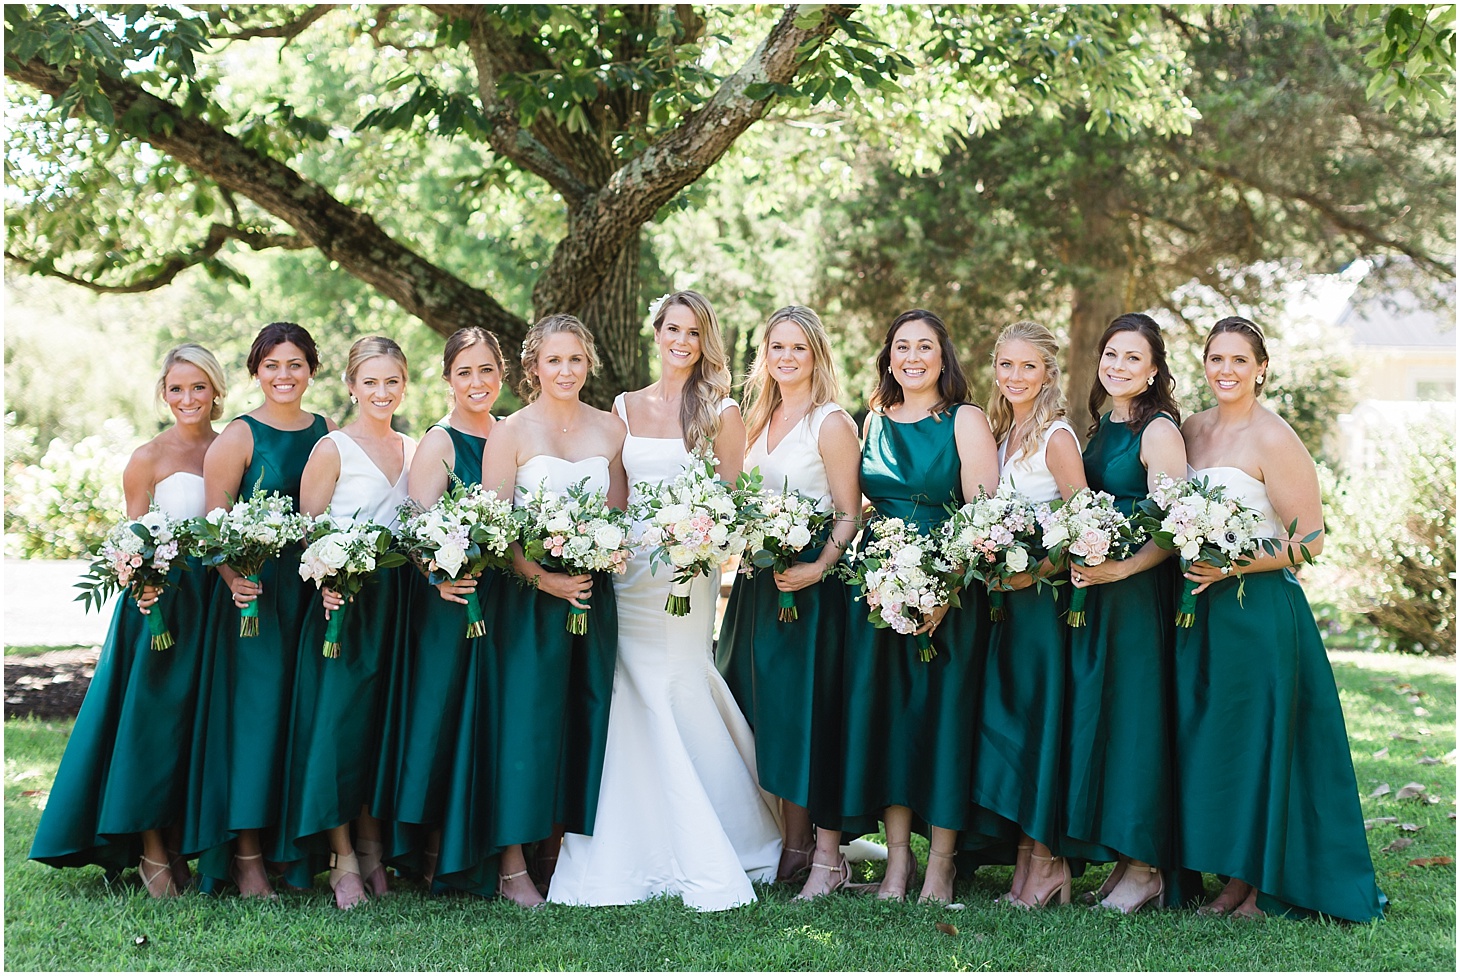 Bridal Party at the Inn at Willow Grove, Green and White Summer Wedding at The Inn at Willow Grove, Ceremony at St. Isidore the Farmer Catholic Church, Sarah Bradshaw Photography, DC Wedding Photographer